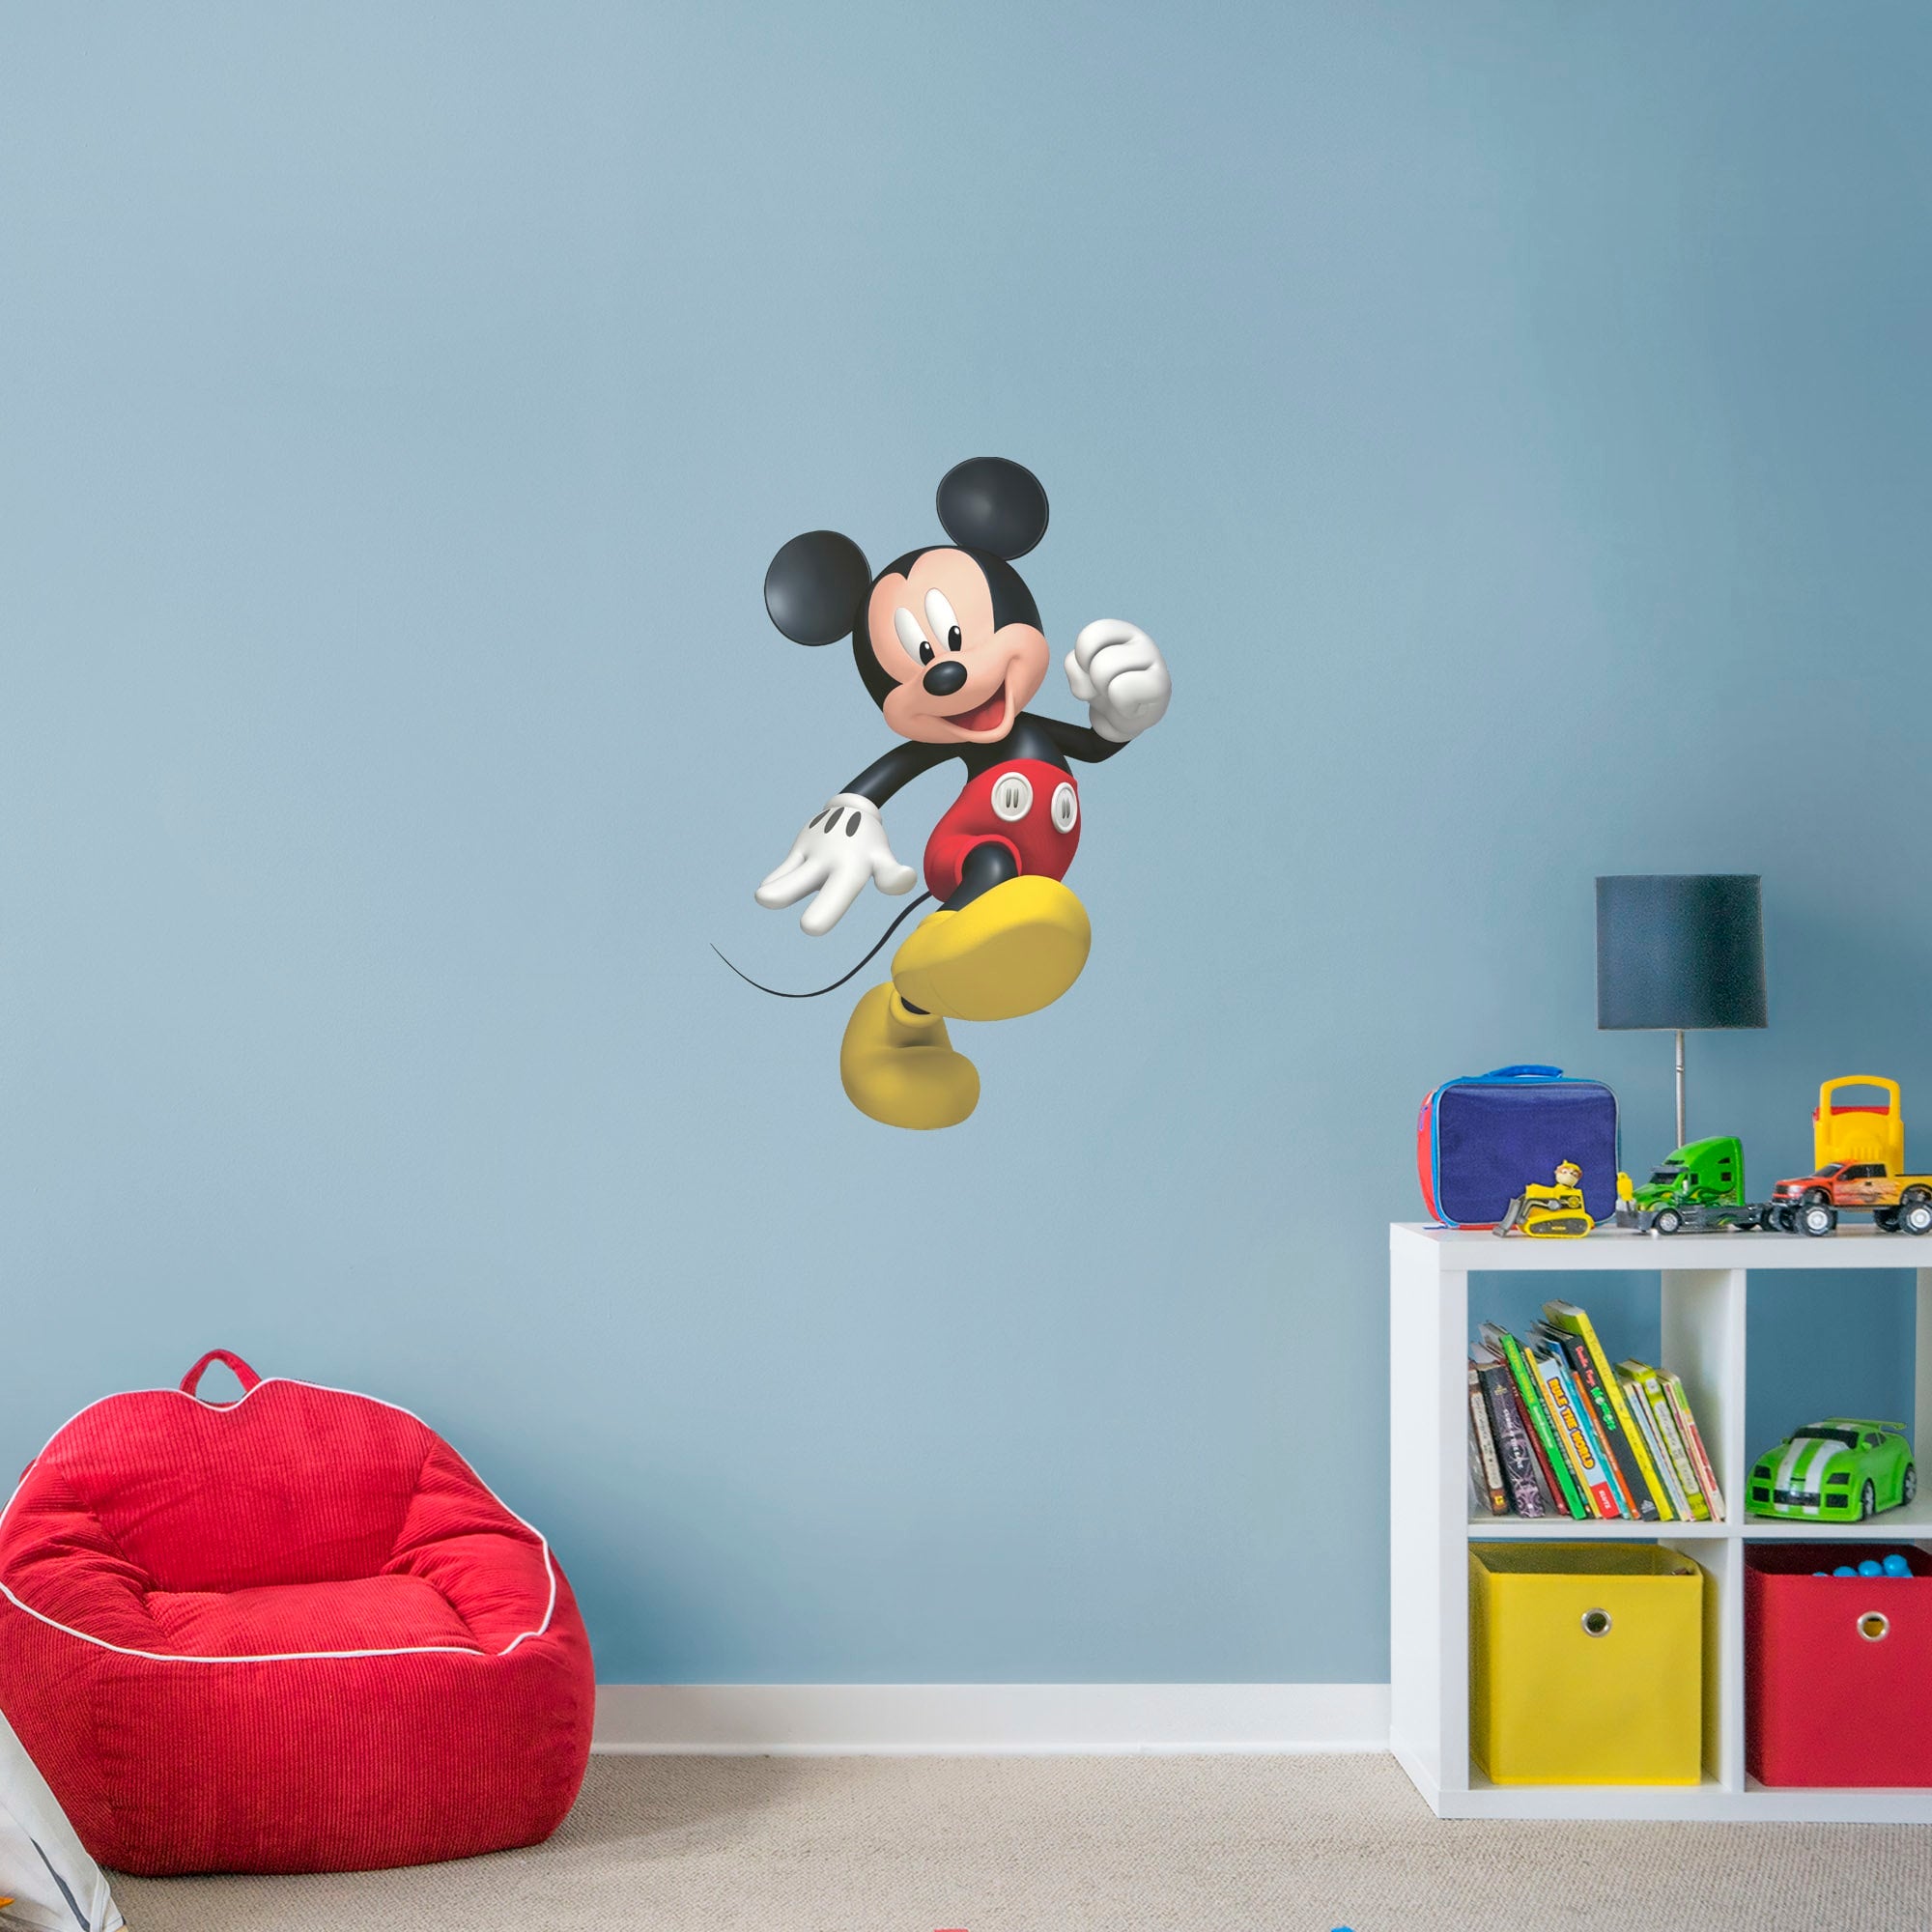 Mickey Mouse - Officially Licensed Disney Removable Wall Decal XL by Fathead | Vinyl